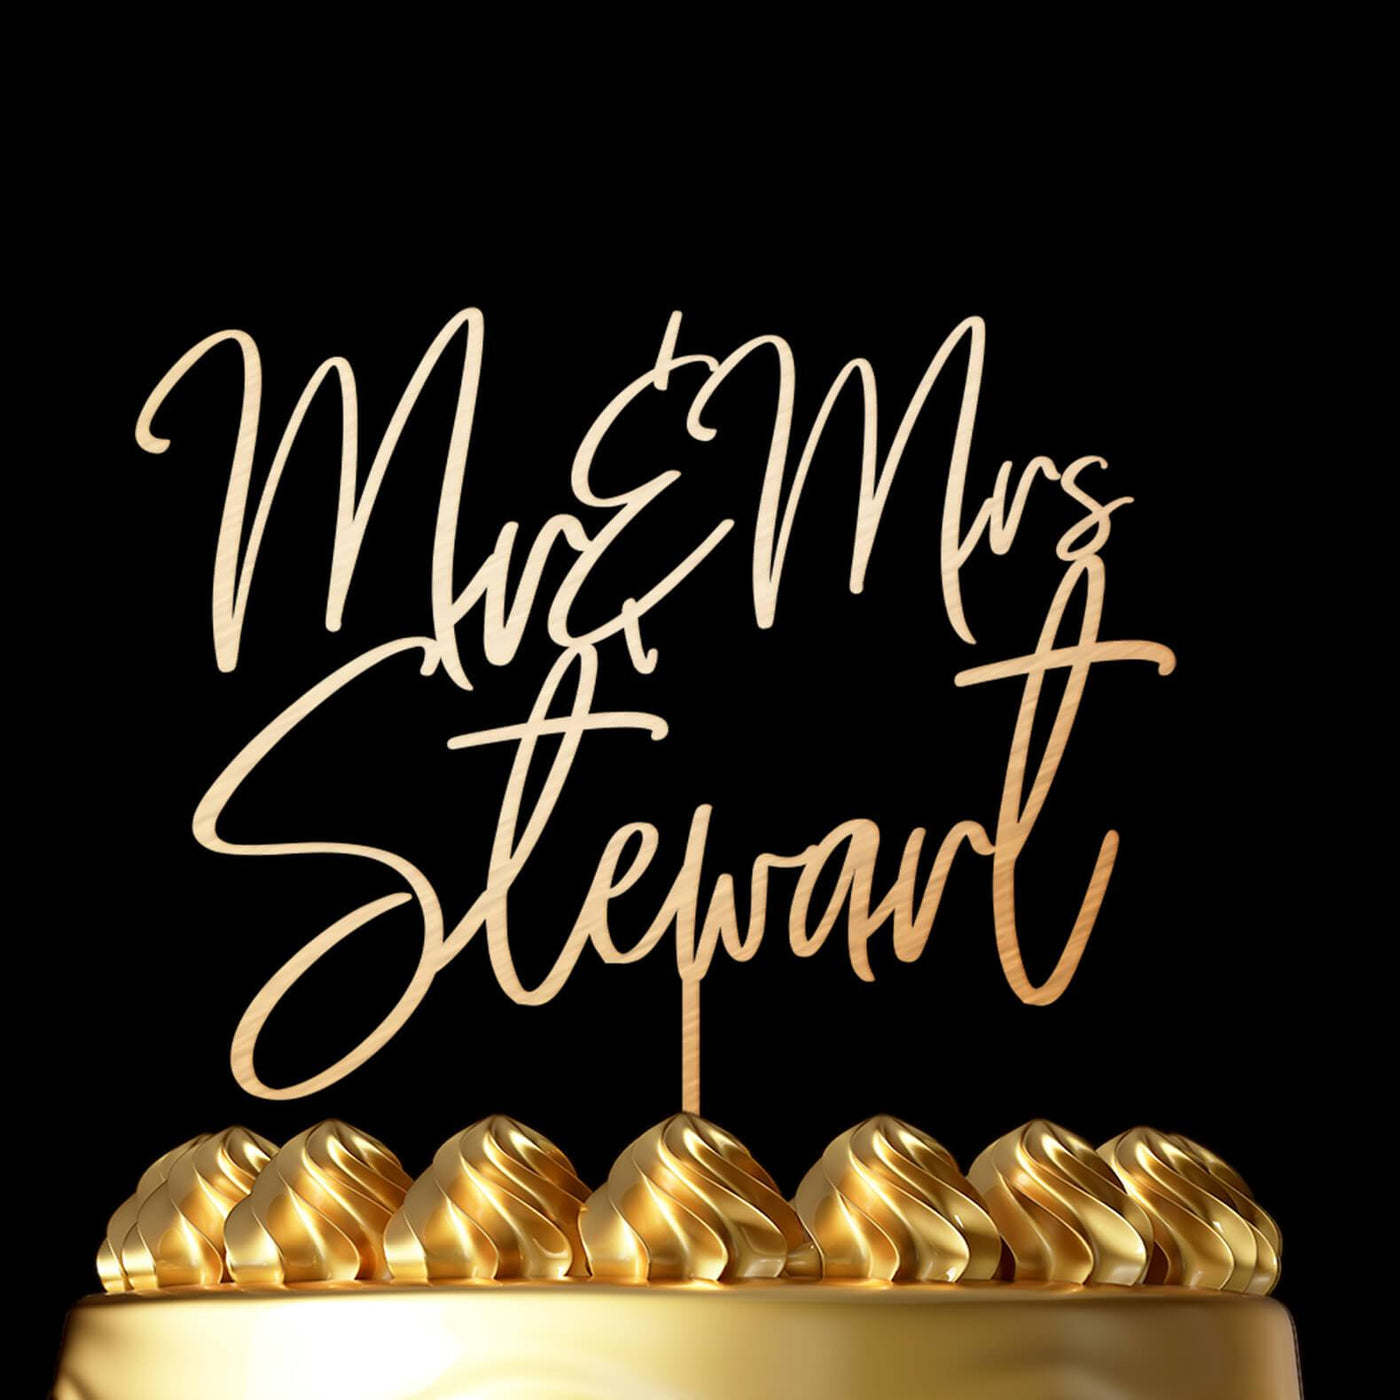 Customized Wedding Cake Toppers - Personalized Mr & Mrs Surname Toppers for Your Big Day